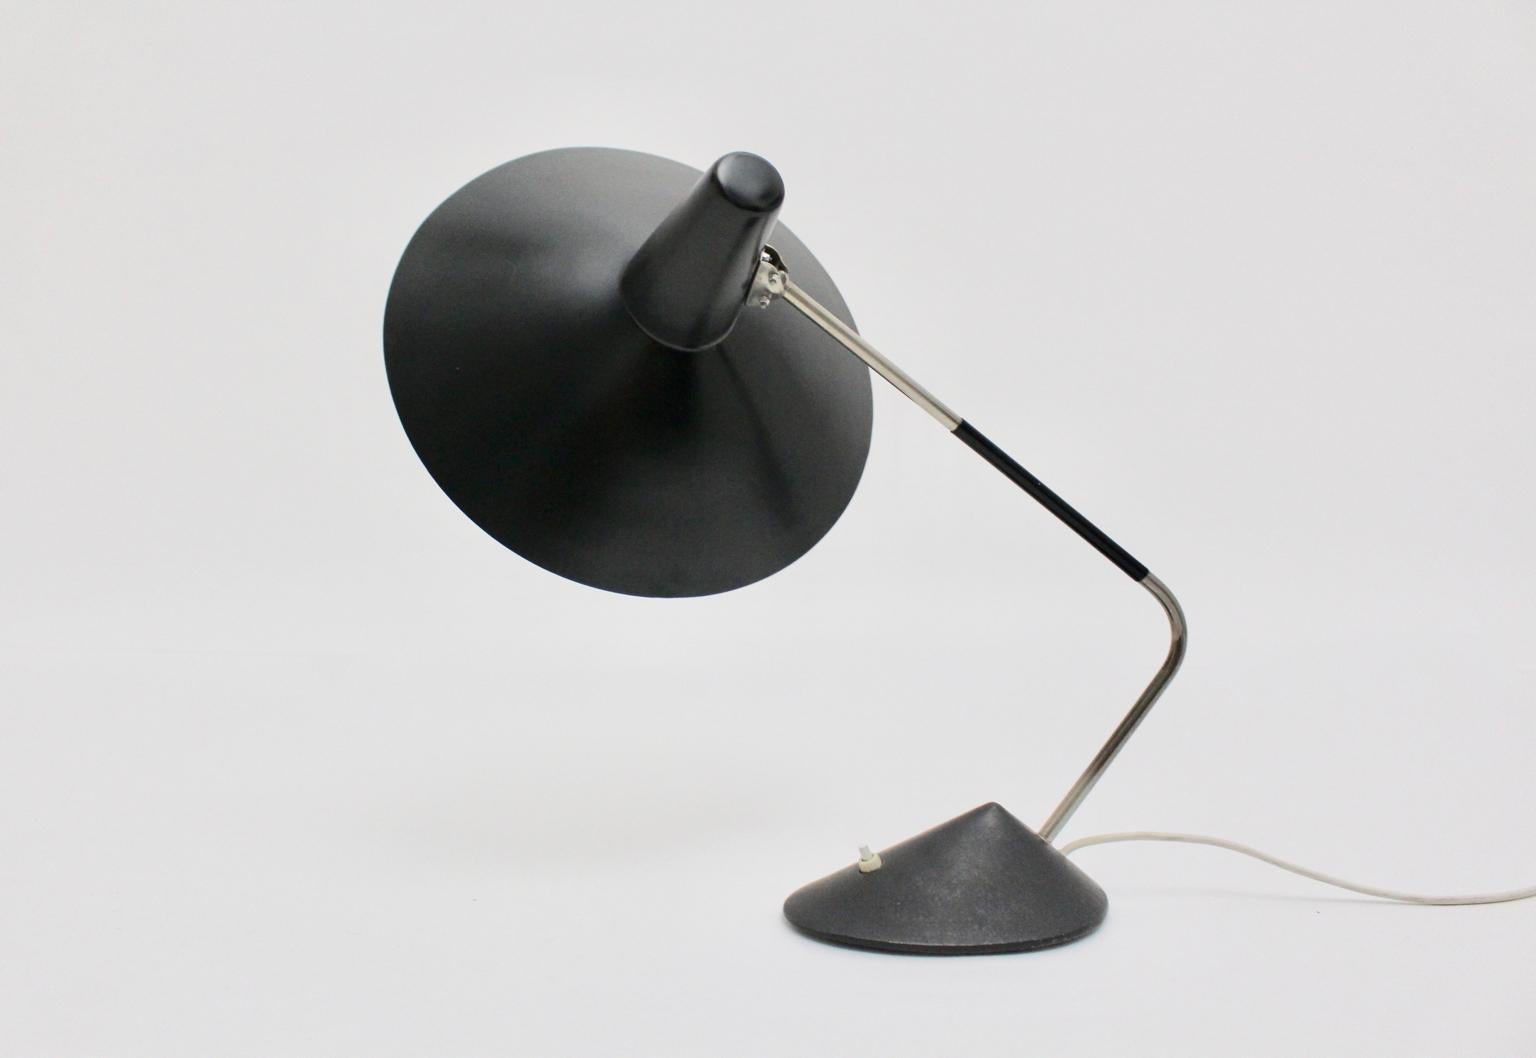 Mid Century Modern  vintage table lamp by Stilnovo made from black metal and nickel-plated metal.
A charming table lamp or desk lamp from the 1950s by Stilnovo with a wonderful shape and style.
The round shaped lamp shade reminds on a witch hat with